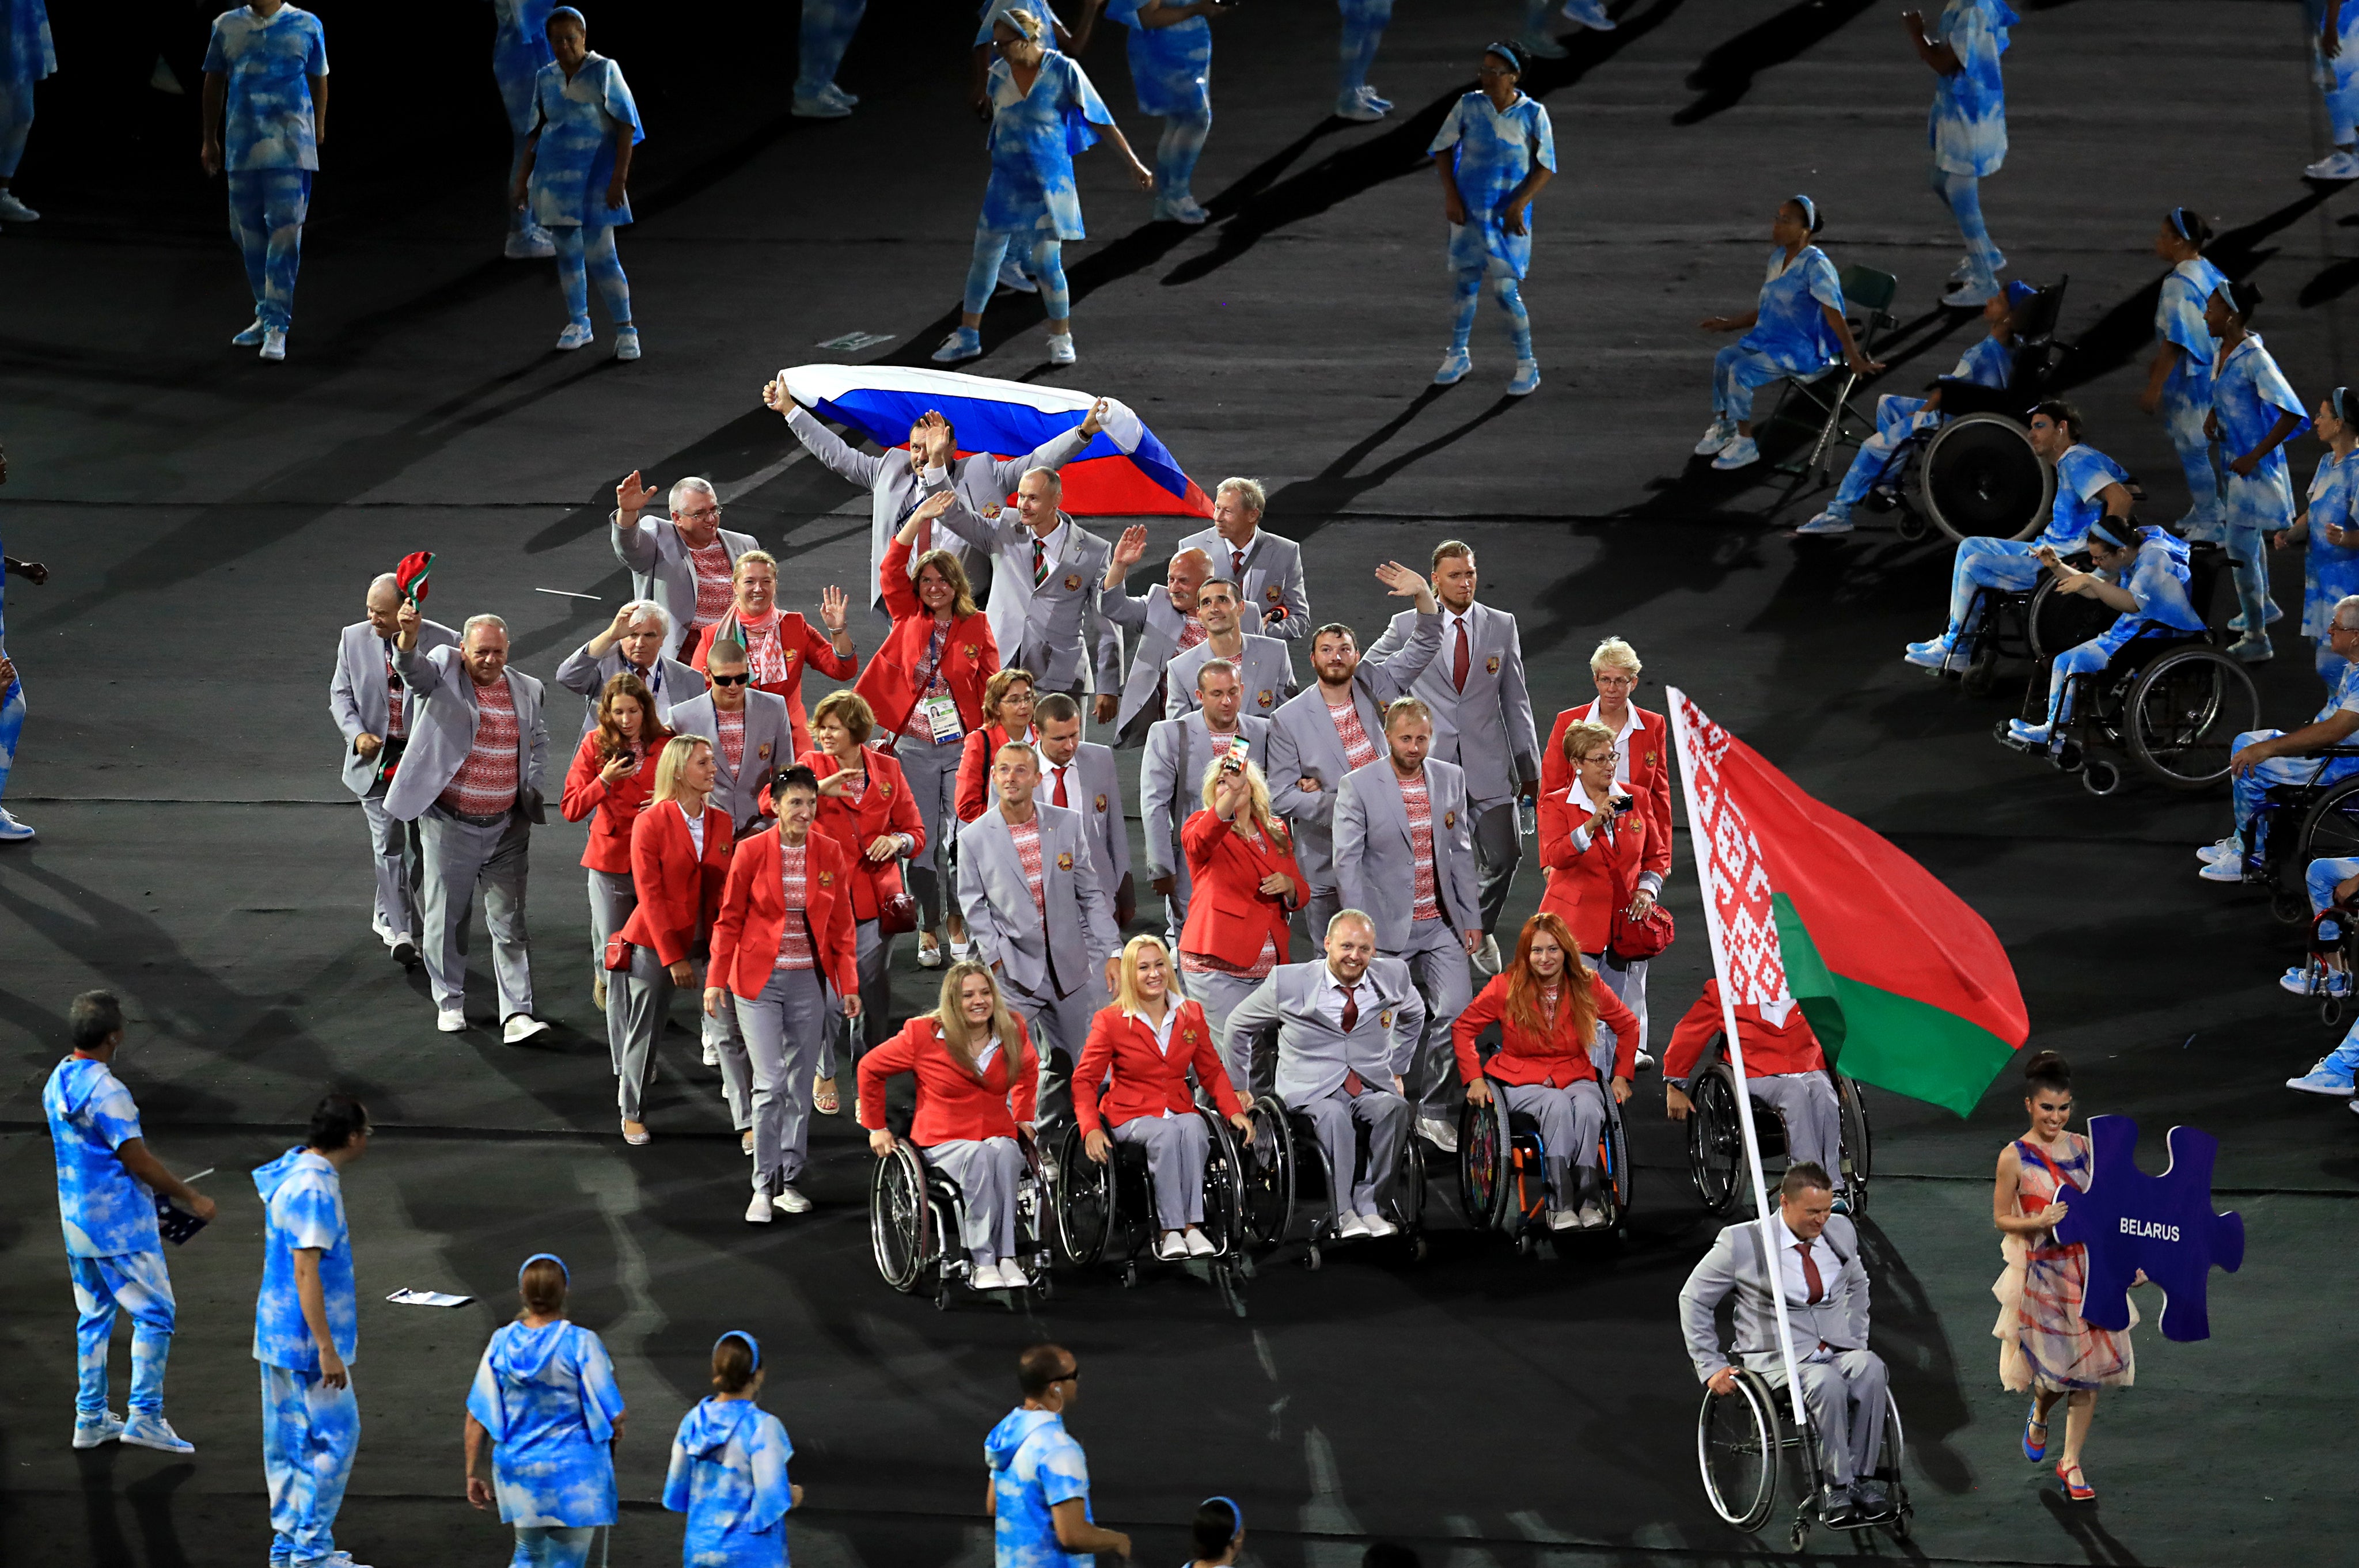 The Belarus team with a member waving a Russian flag during the opening ceremony of the 2016 Rio Paralympic Games